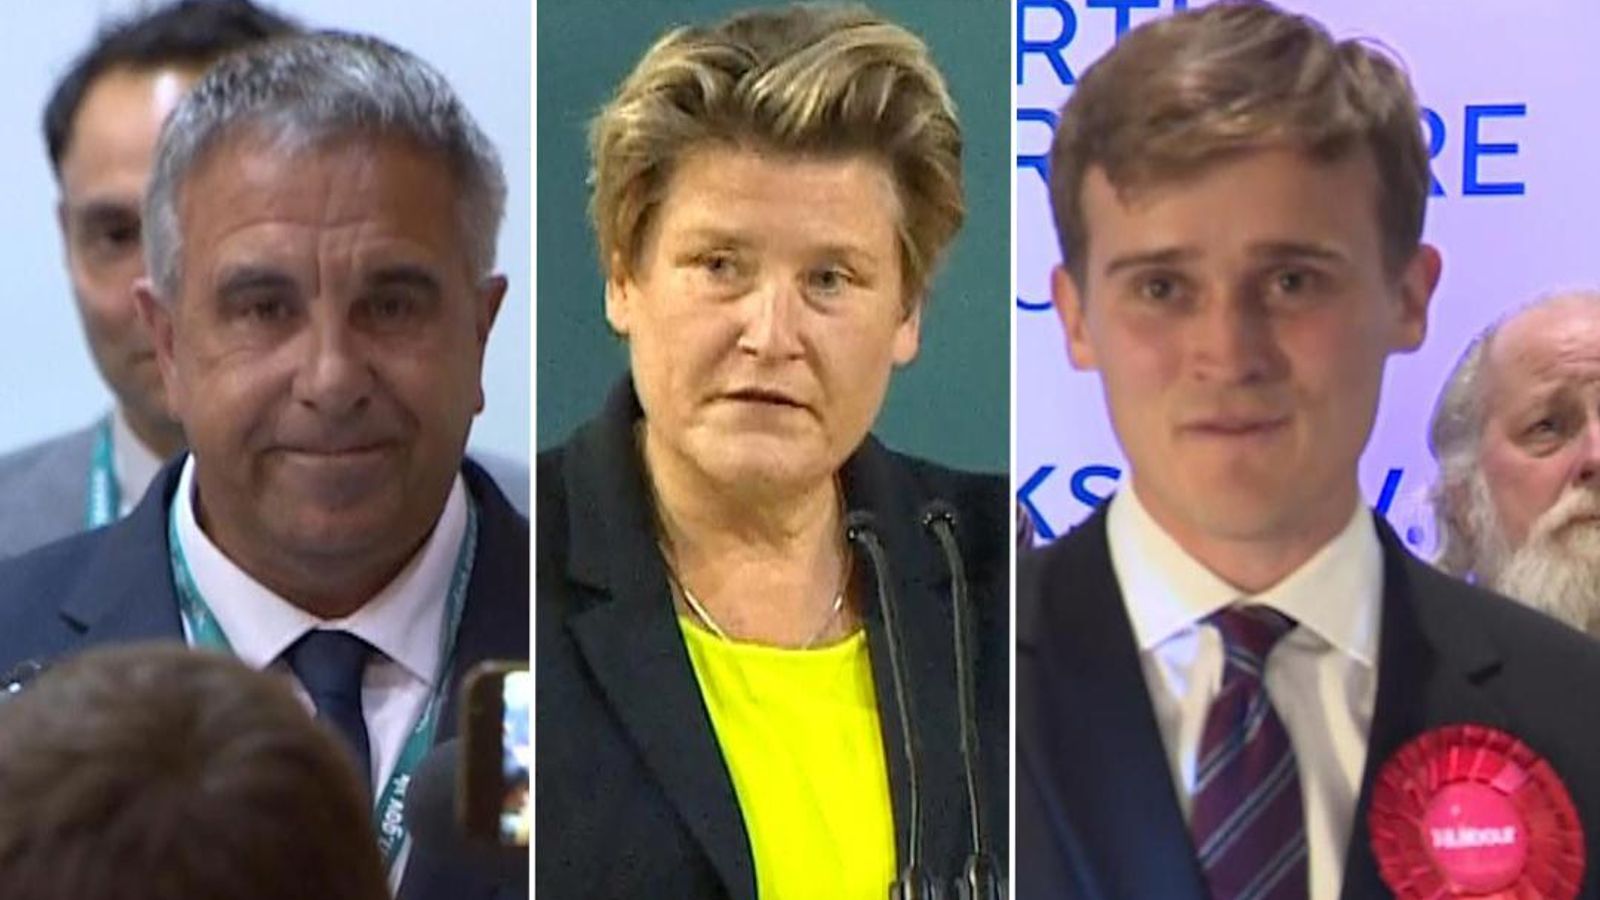 By-election results: Who are the new MPs in Uxbridge and South Ruislip, Selby and Ainsty, and Somerton and Frome?